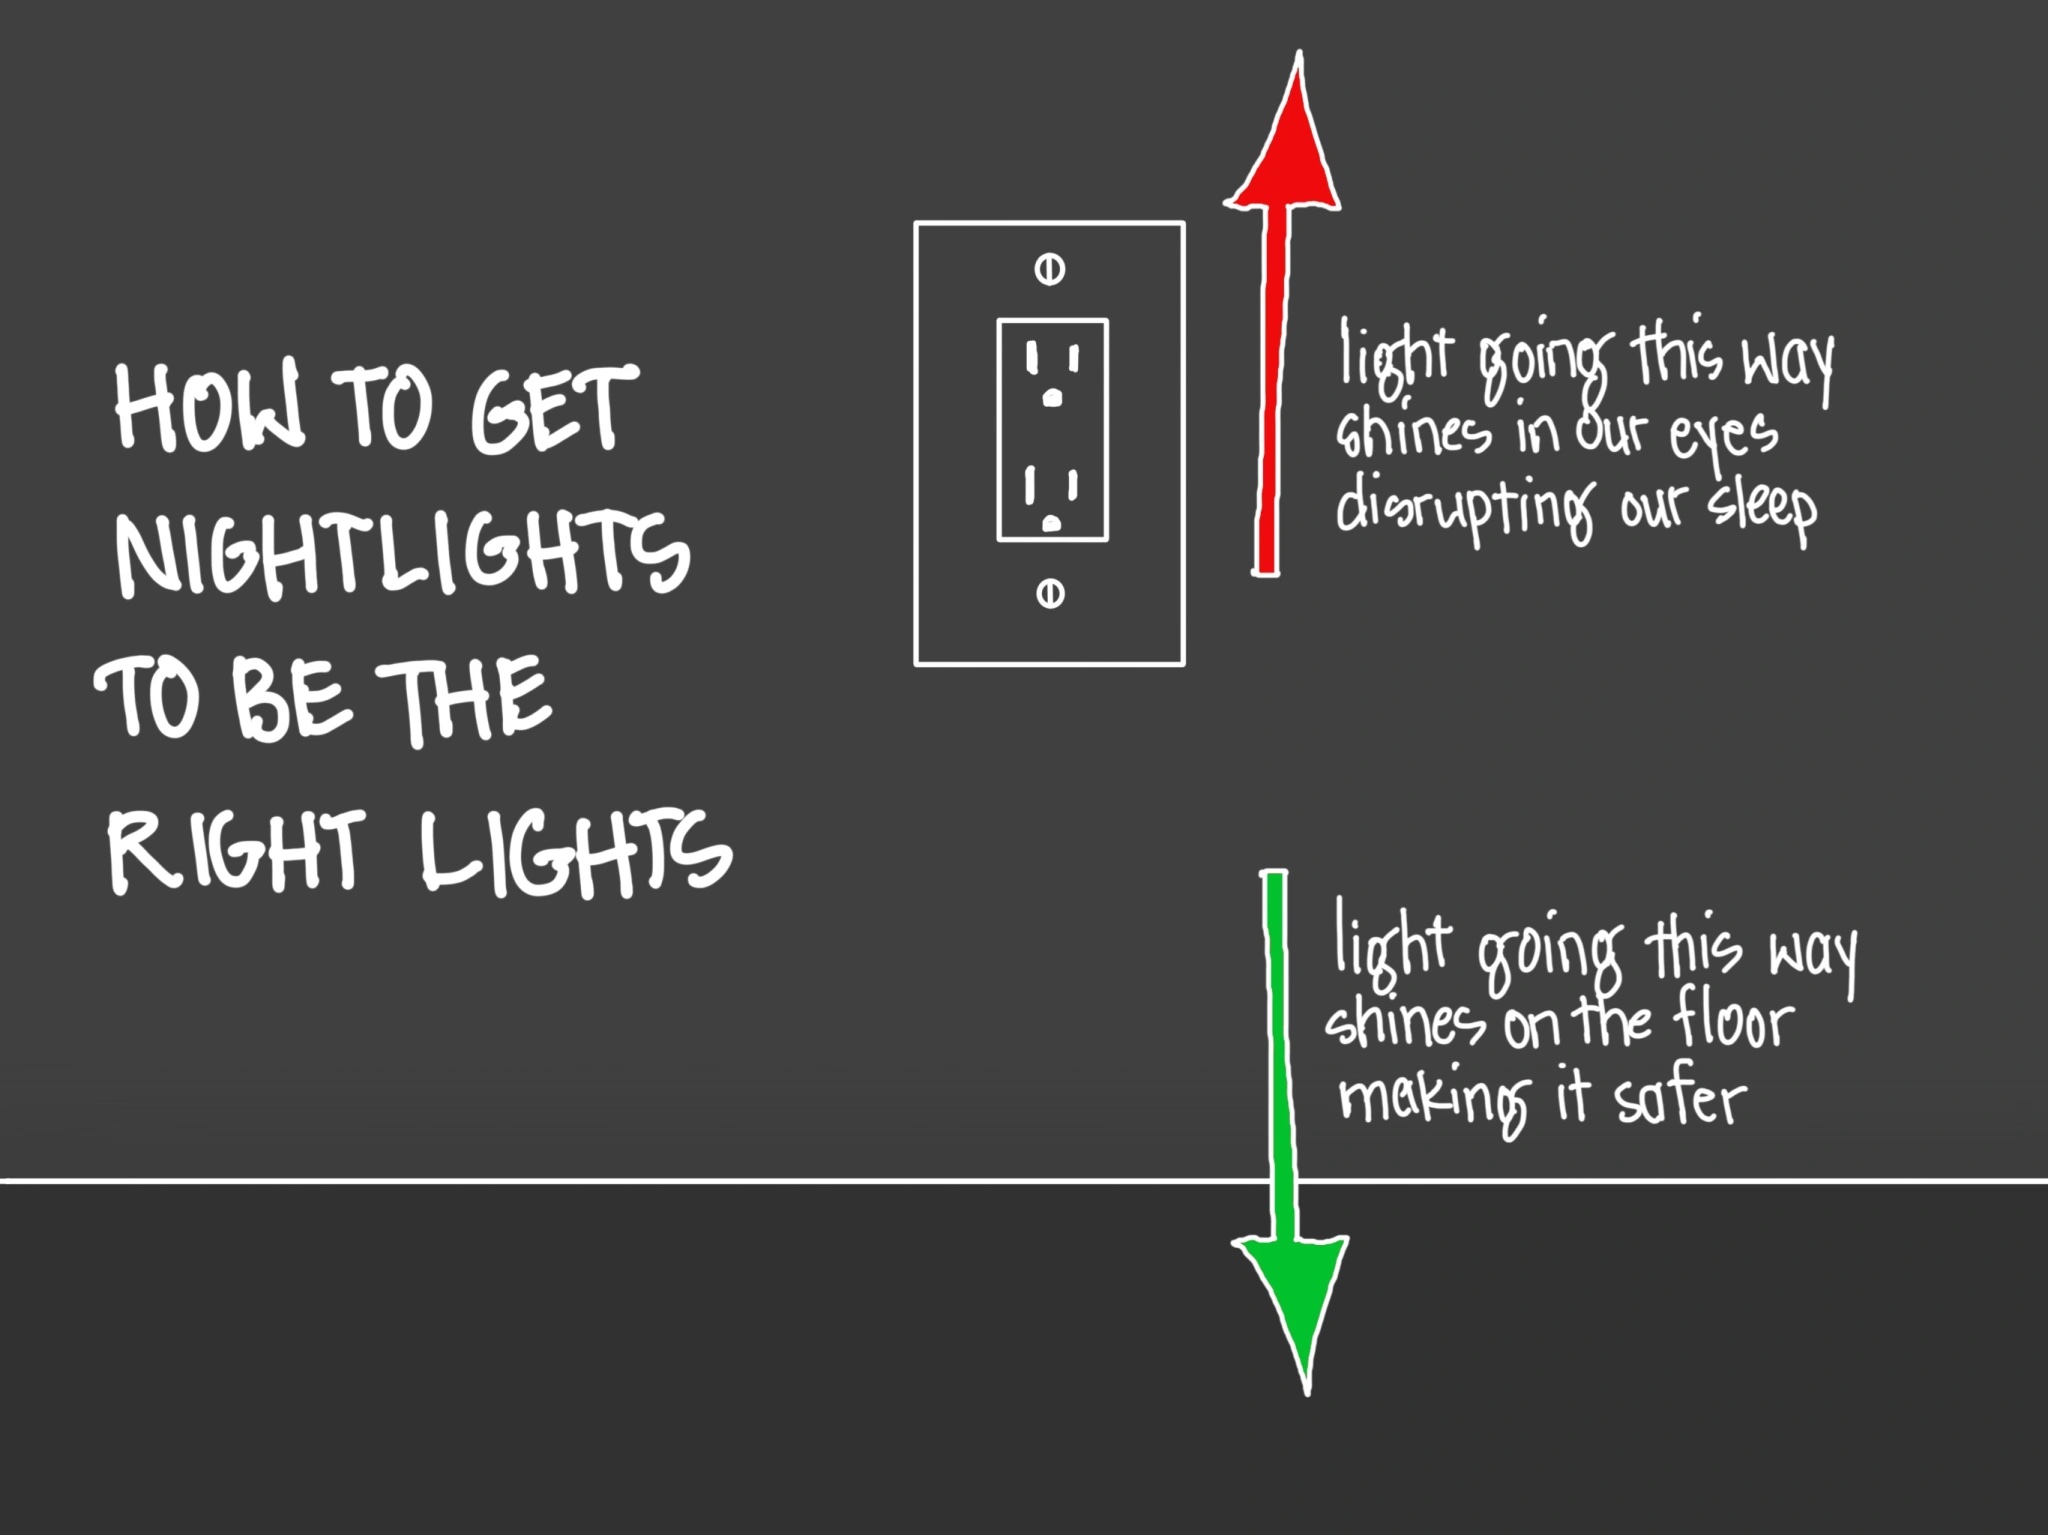 HOW TO GET NIGHTLIGHTS TO BE THE RIGHT LIGHTS. Next to a red arrow pointing up: light going this way shines in our eyes disrupting our sleep Next to a green arrow pointing down: light going this way shines on the floor making it safer